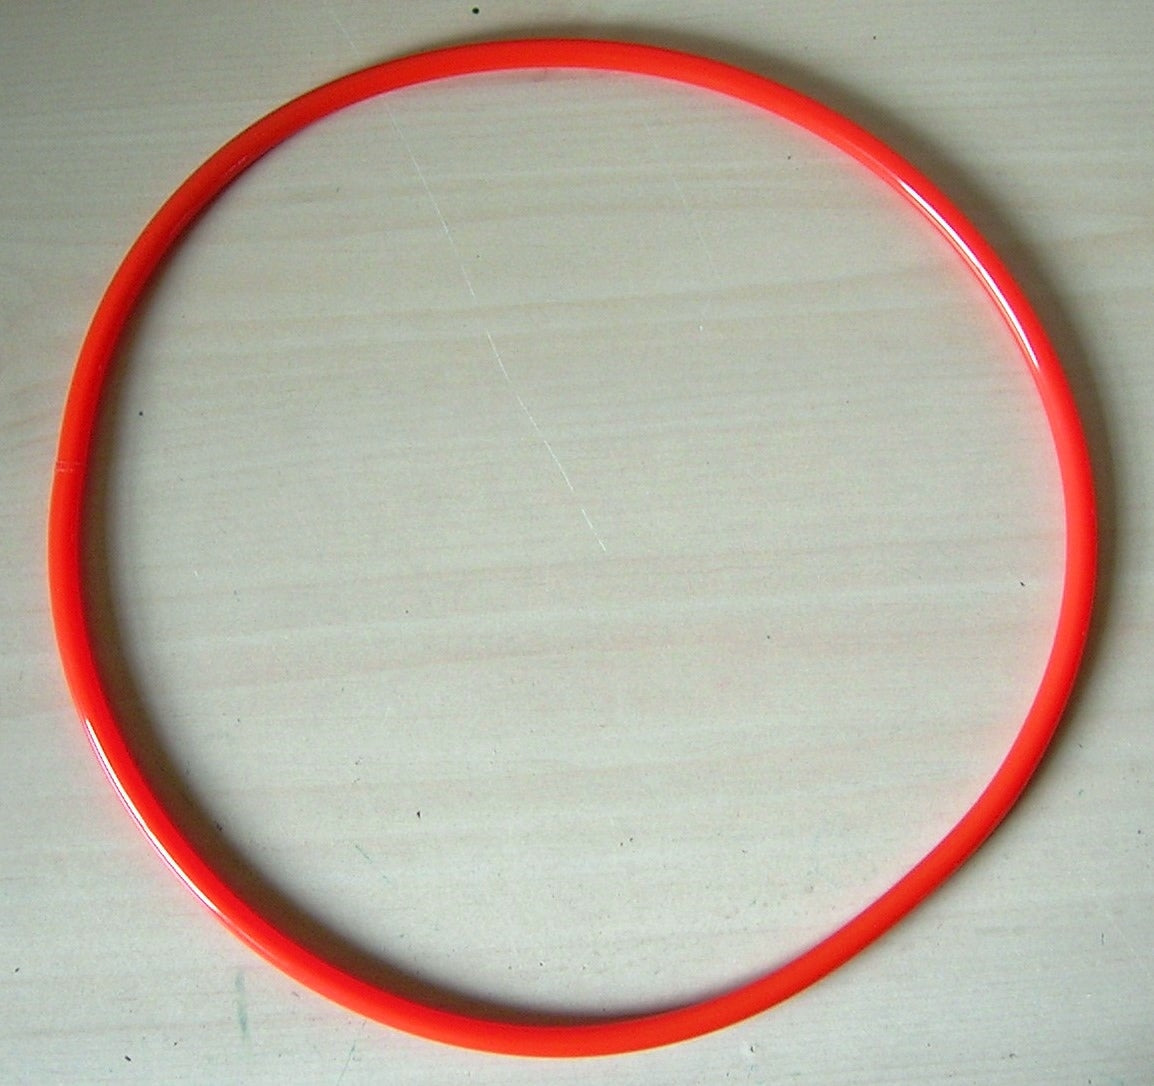 1/4" ROUND DRIVE BELT FOR VALUE CRAFT Model 8170A BAND SAW